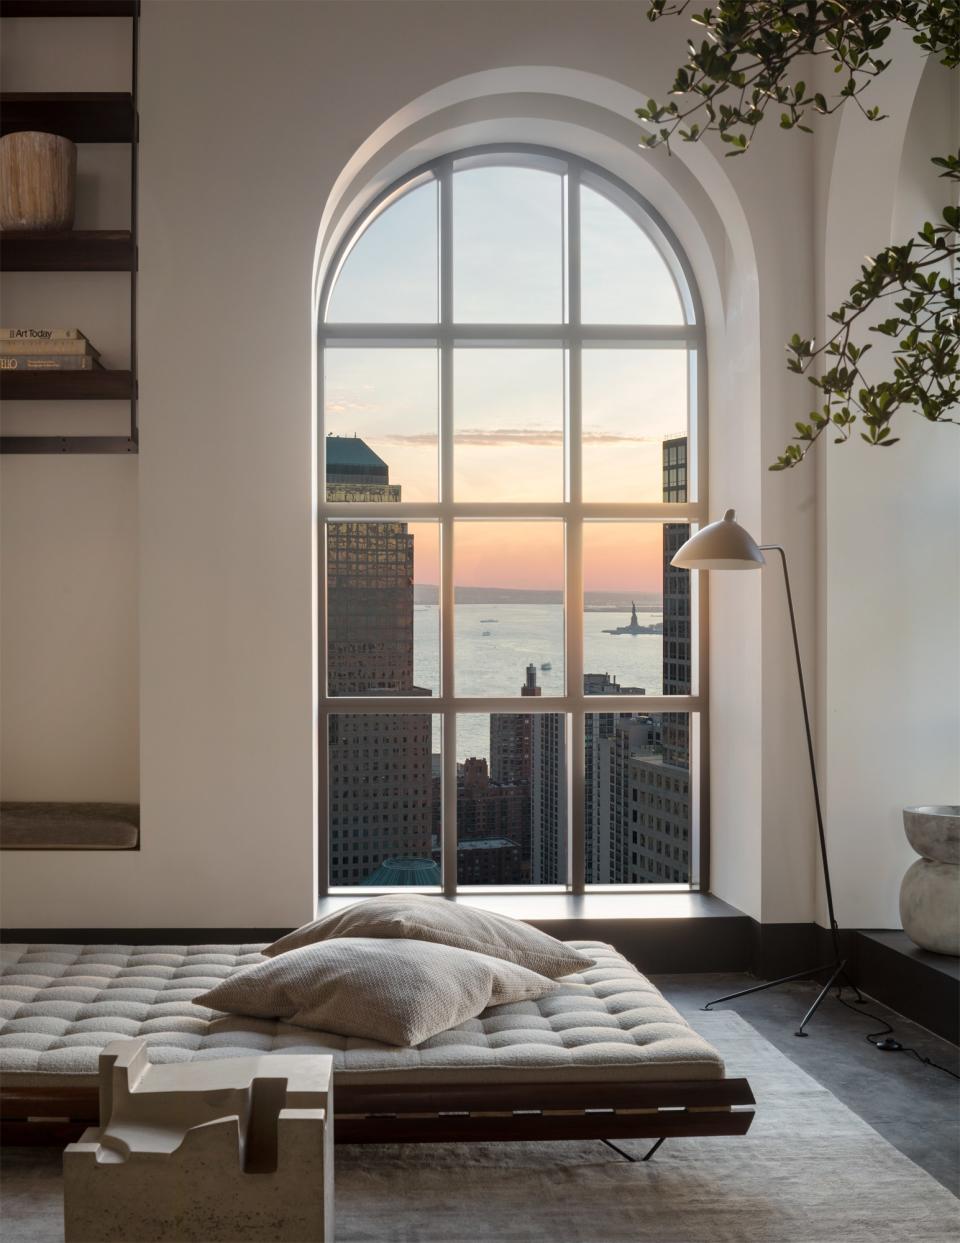 "From the windows you can view the Hudson River, the Statue of Liberty, and the Empire State Building, and, of course, those kinds of views end up being the ultimate focal points of the residence," Ford says. He endeavored to select furnishings and art that complement the sweeping views.